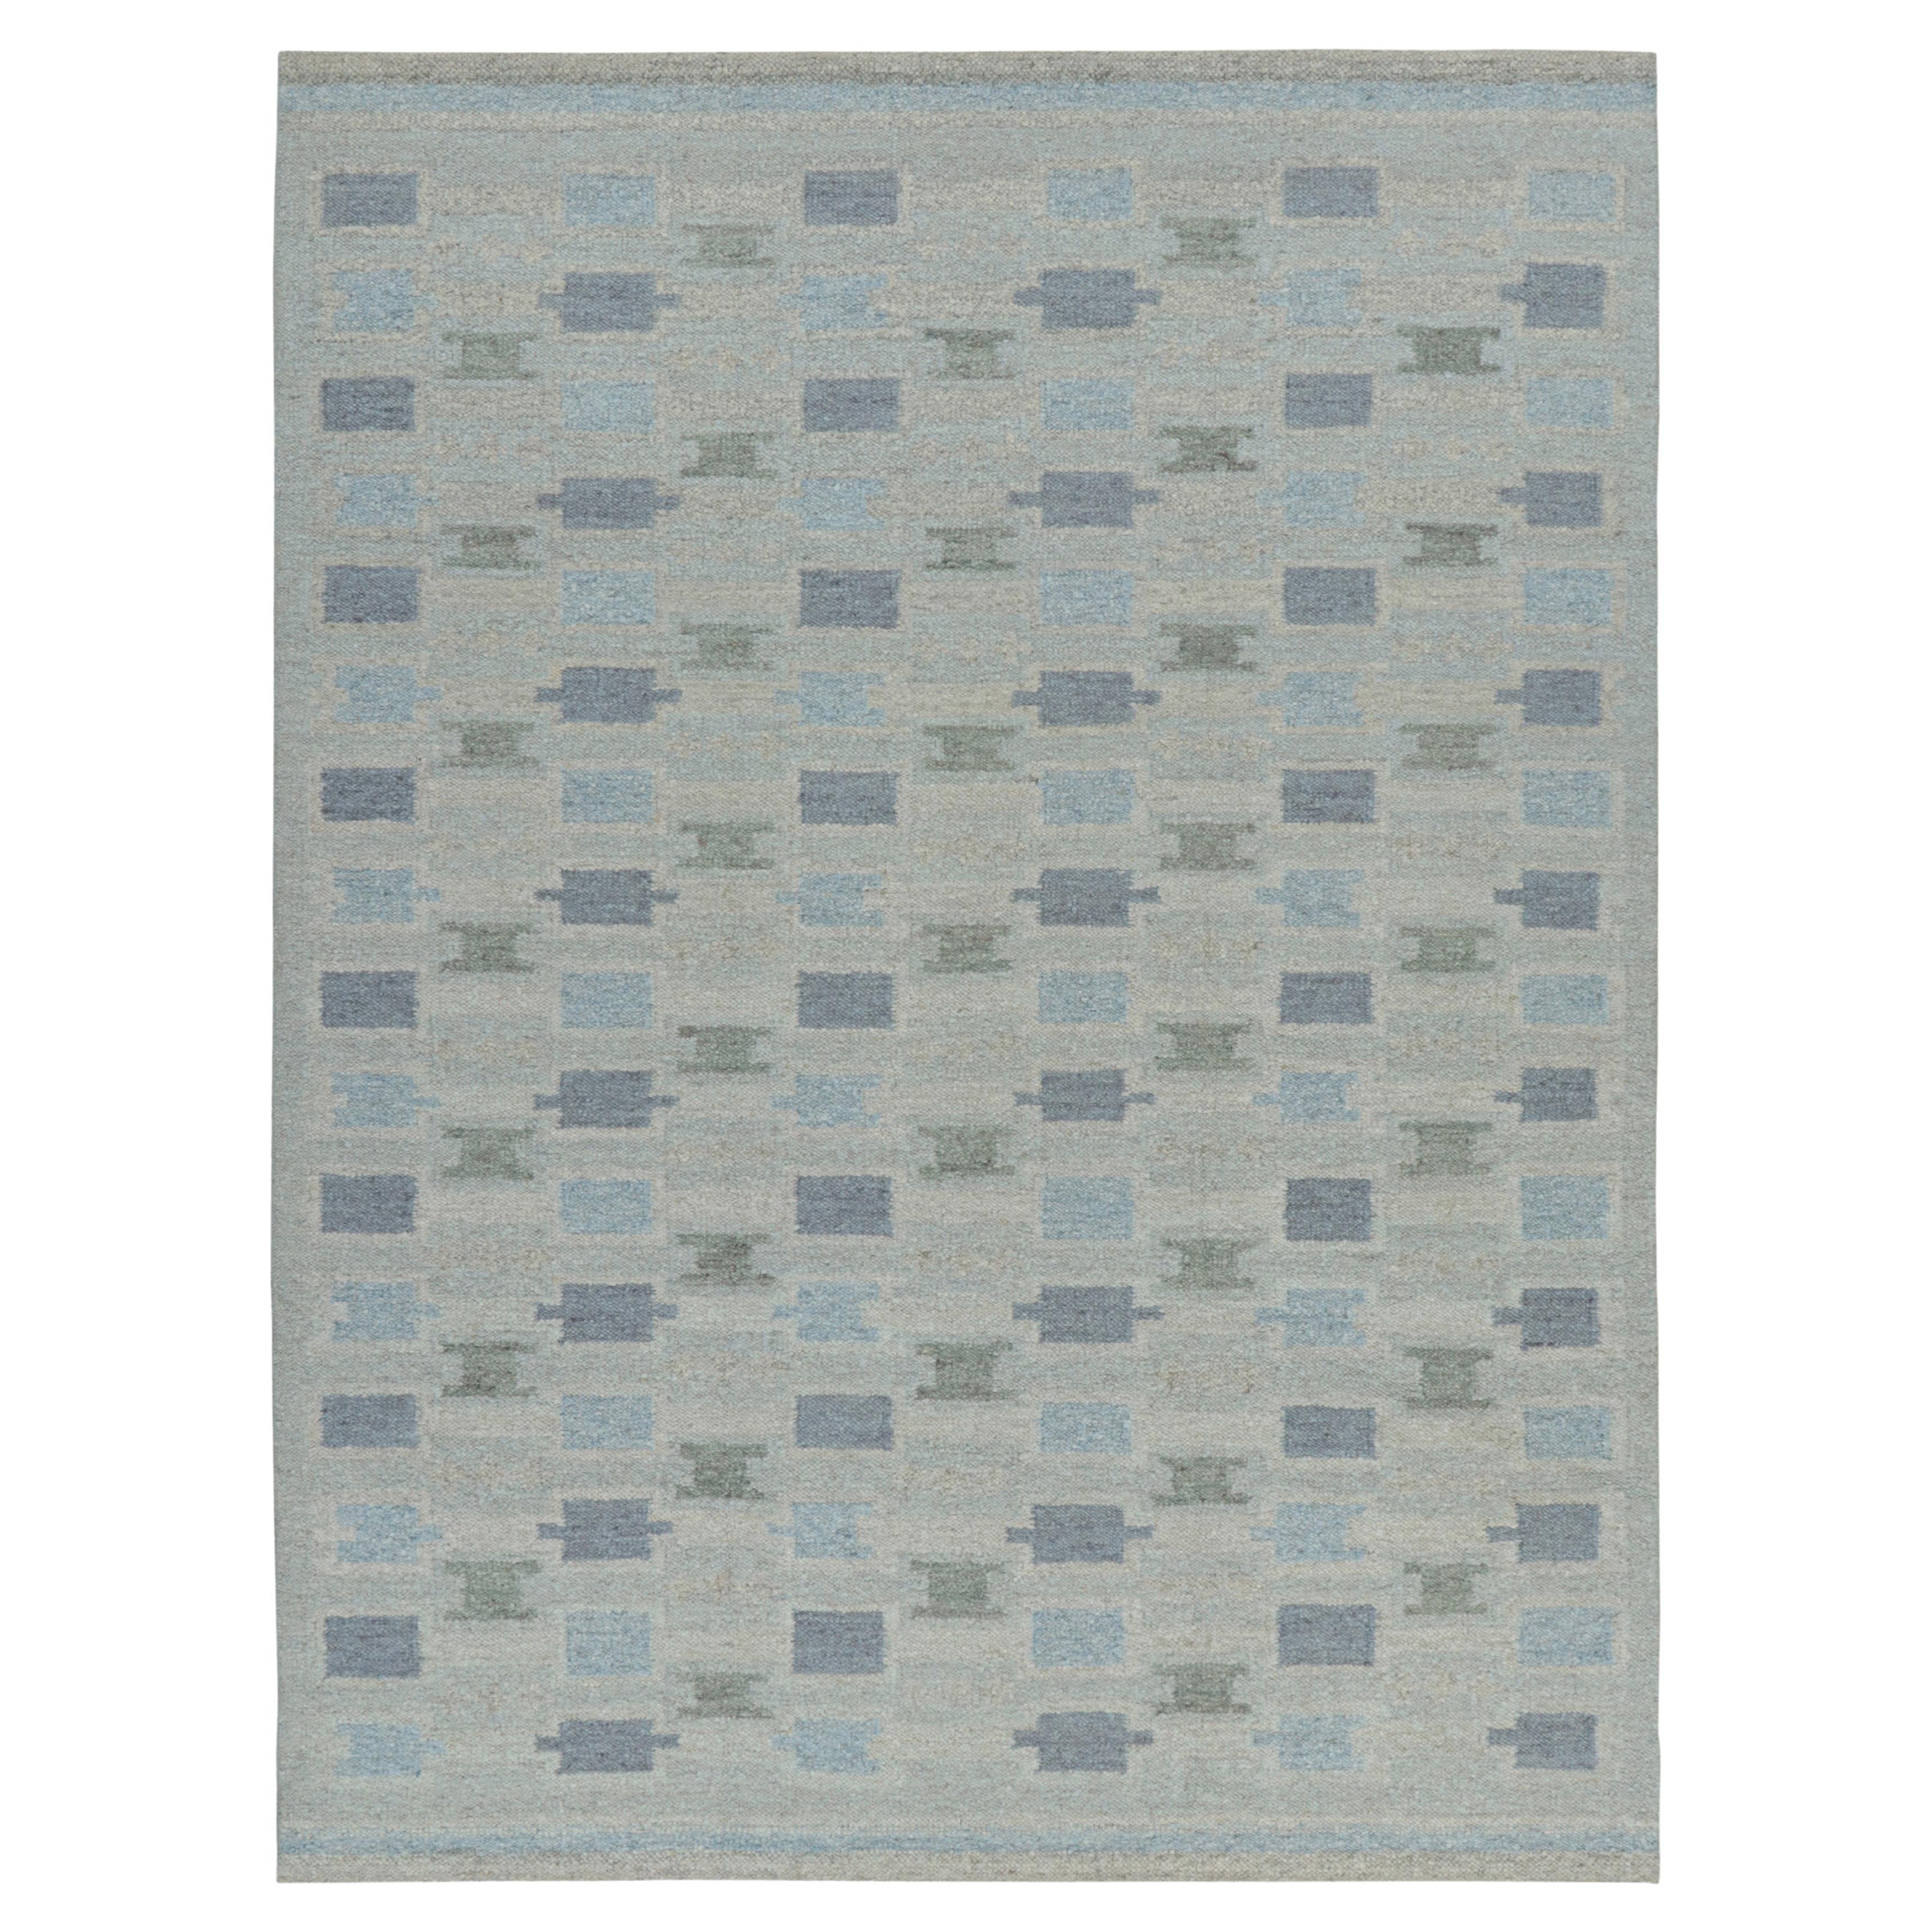 Rug & Kilim’s Scandinavian Style Rug in Blue Tones with Geometric Patterns